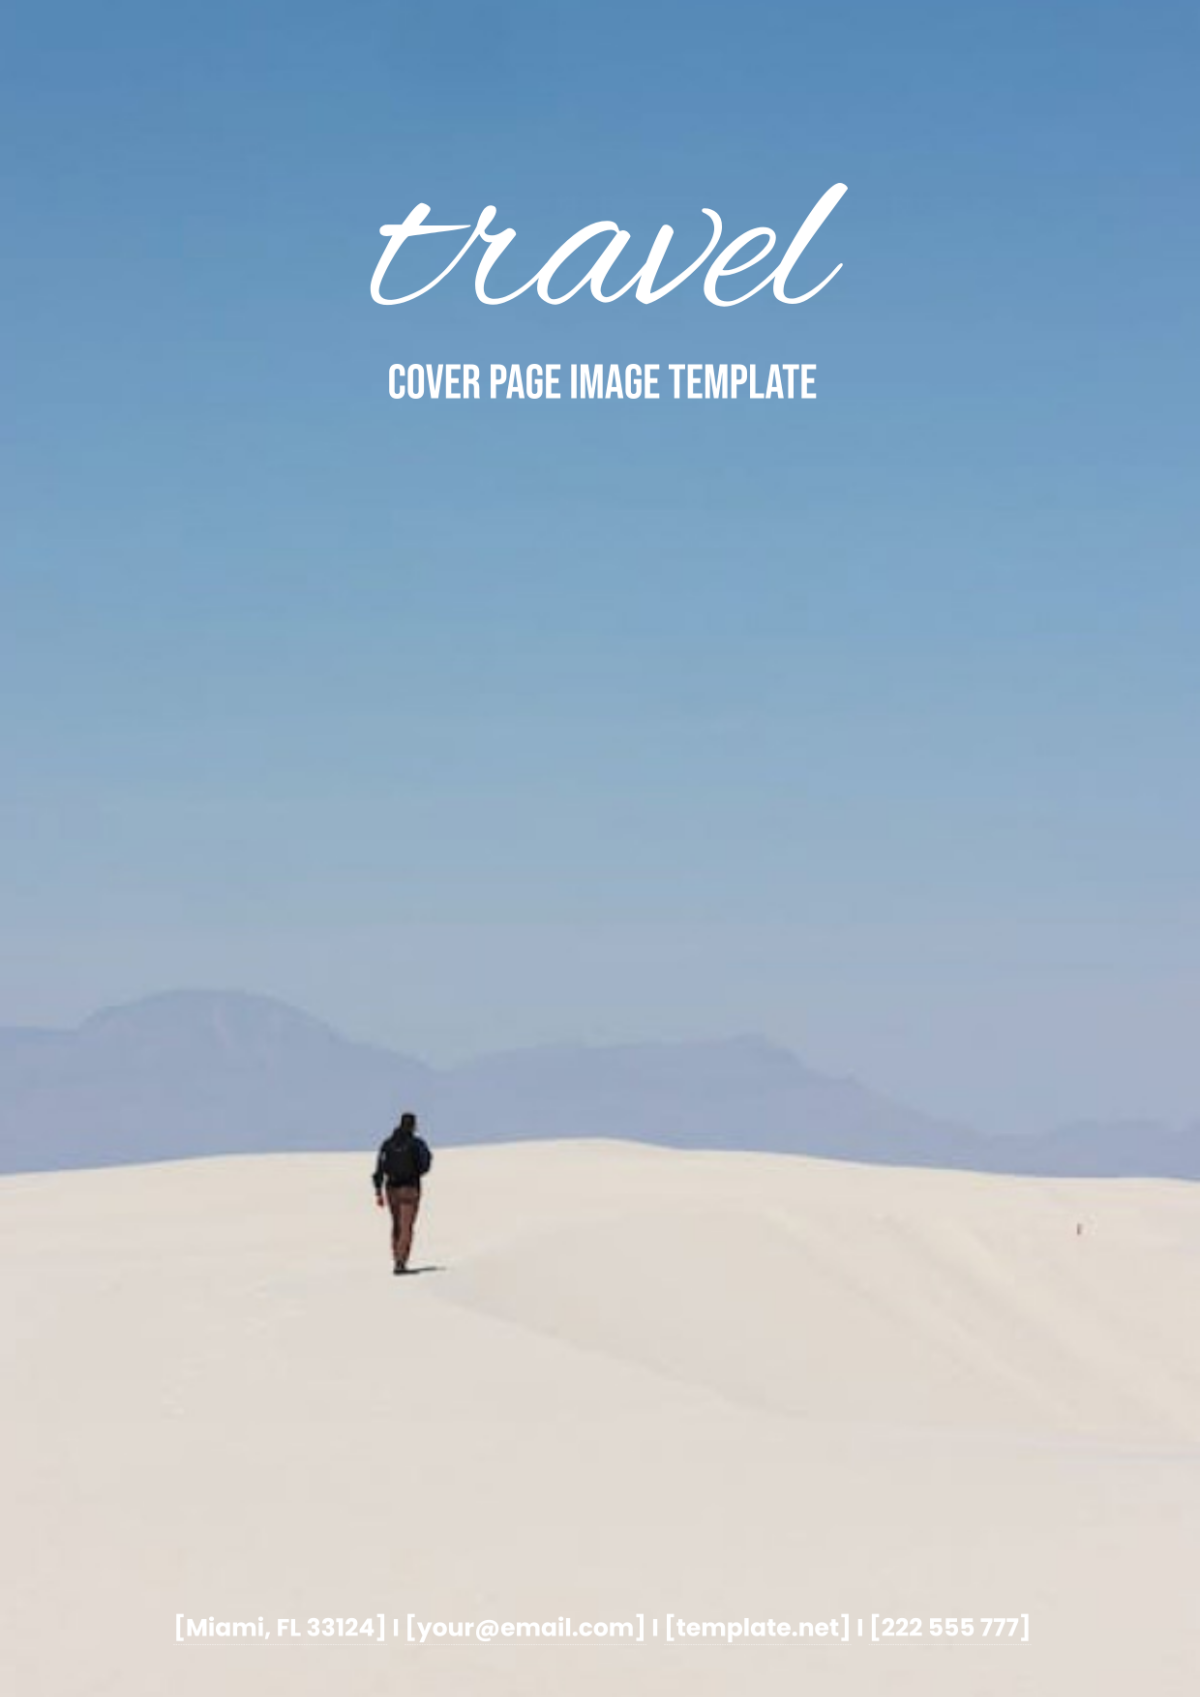 Free Travel Cover Page Image  Template